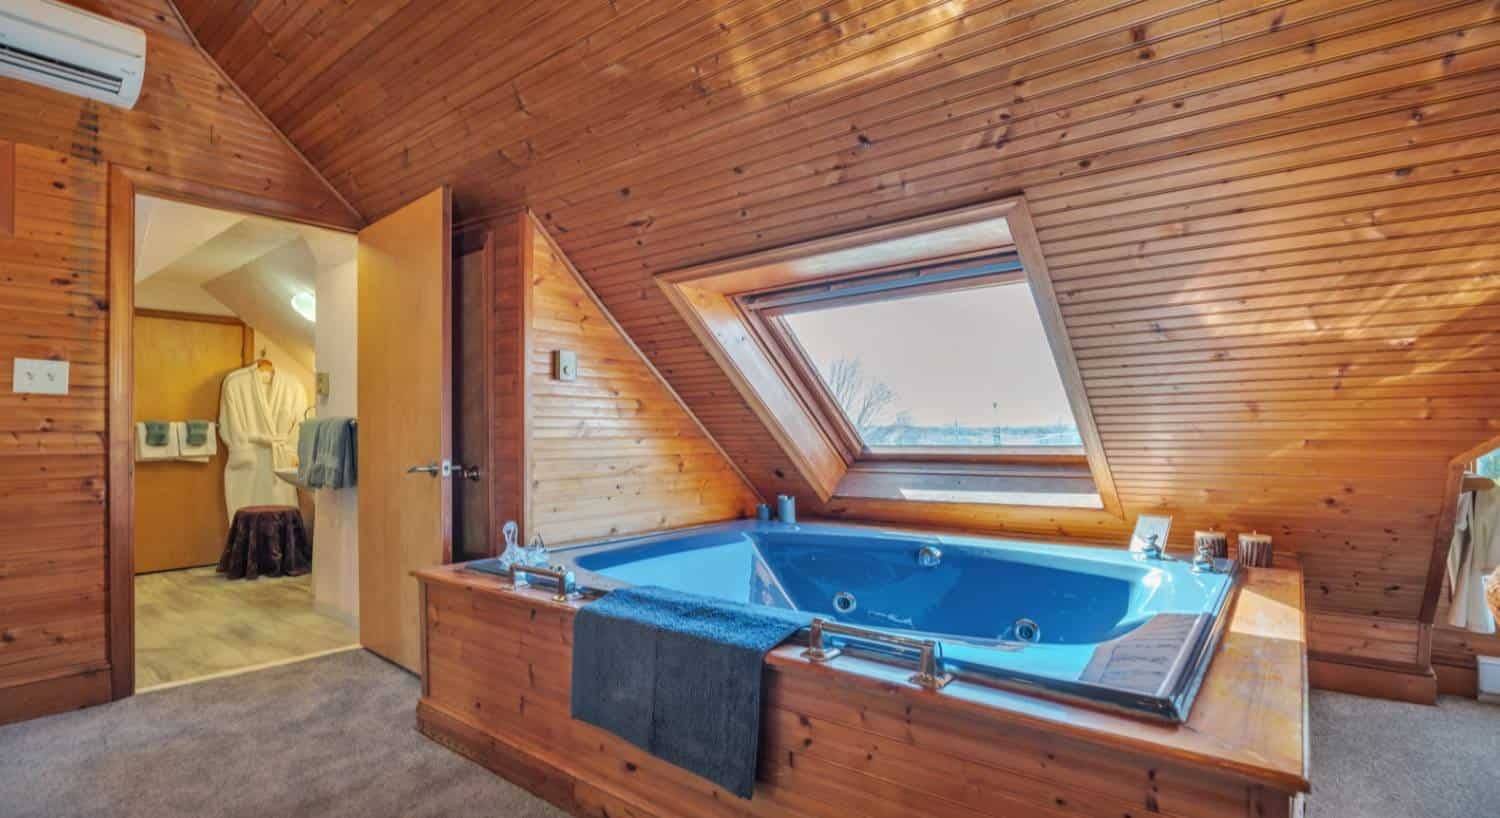 Room with floor to ceiling wood paneling, blue jetted tub surrounded by wood paneling, and large window with views to the outside